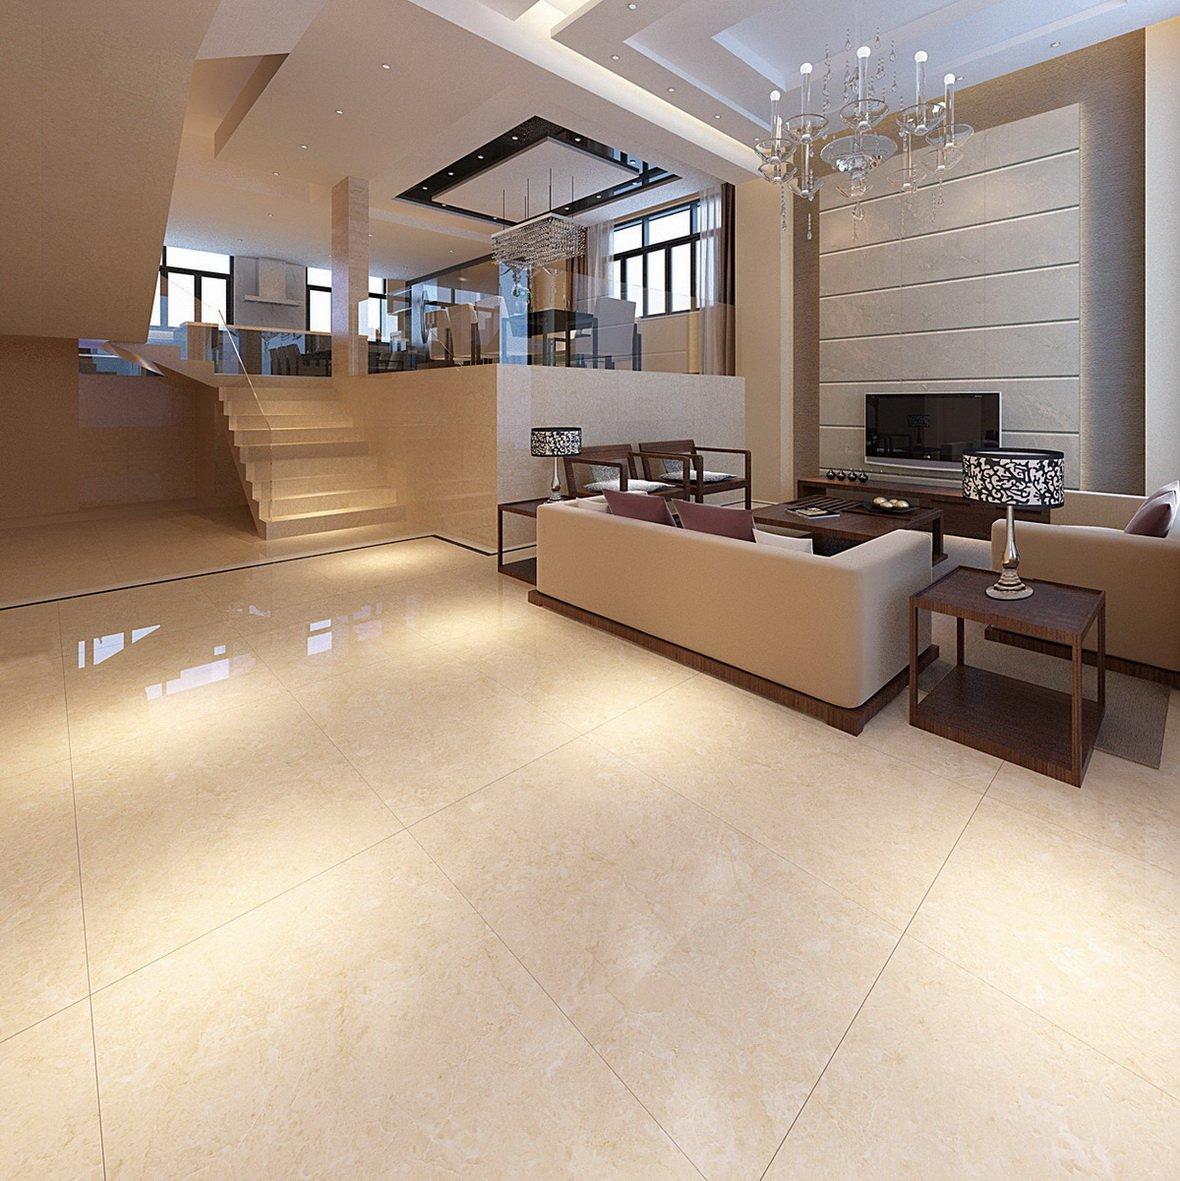 Altman beige marble Full polished tiles with full body VDLS1261319YJT 60X120cm/24x48'